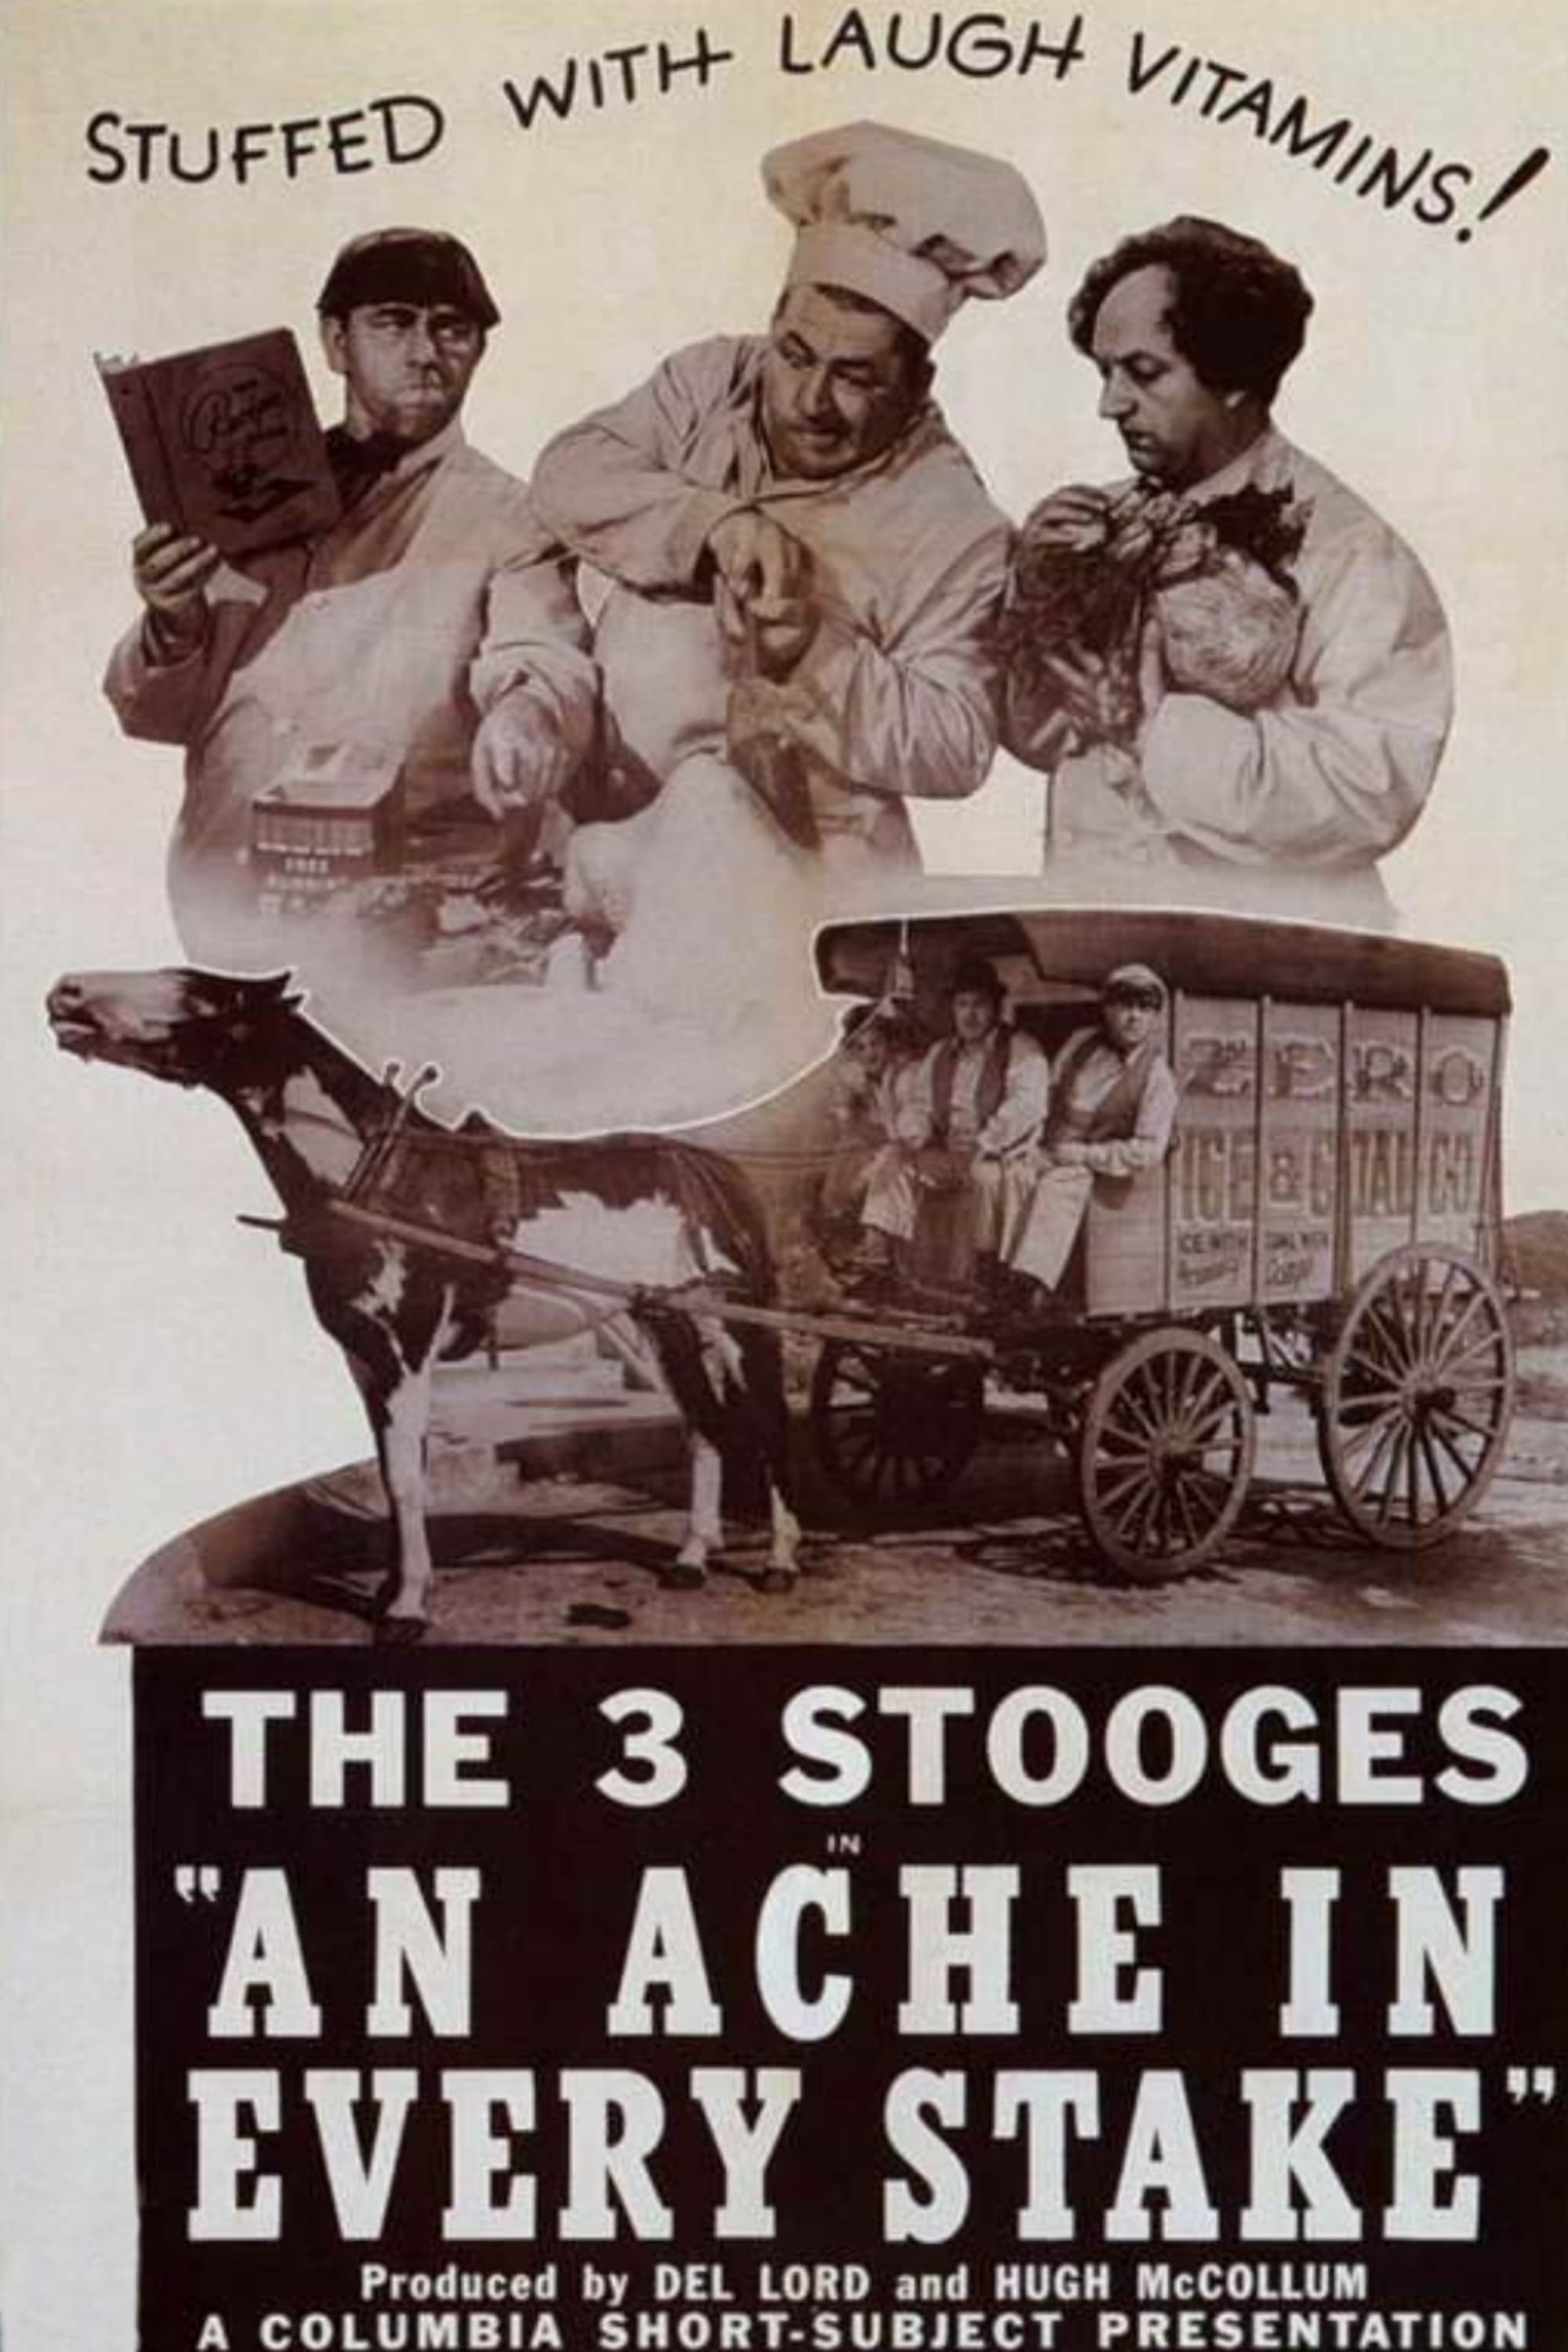 An Ache in Every Stake (1941)